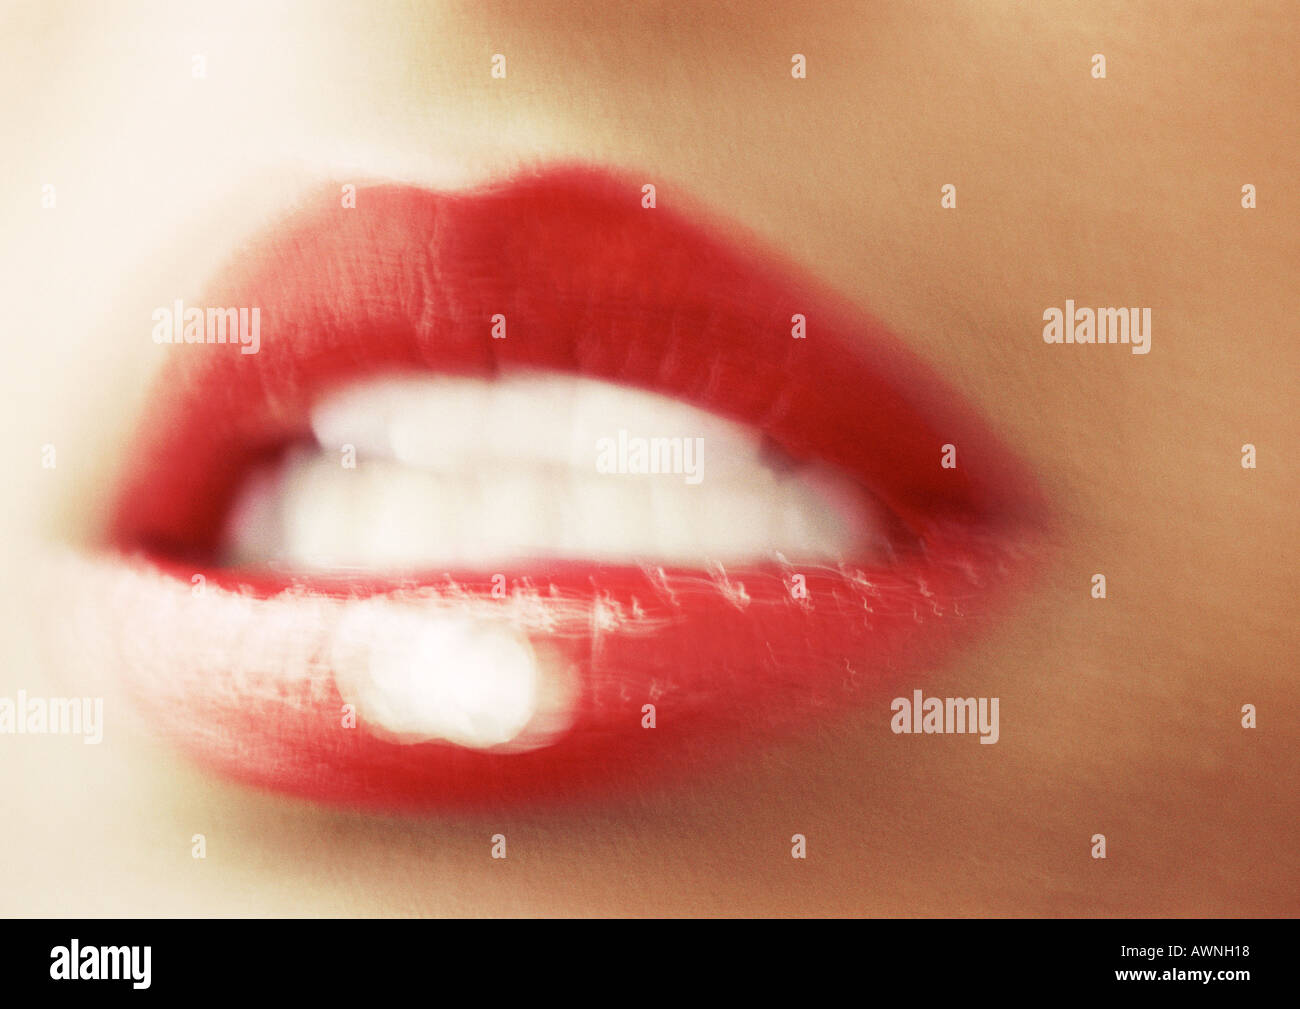 Woman wearing red lipstick, close up of open mouth, blurred. Stock Photo